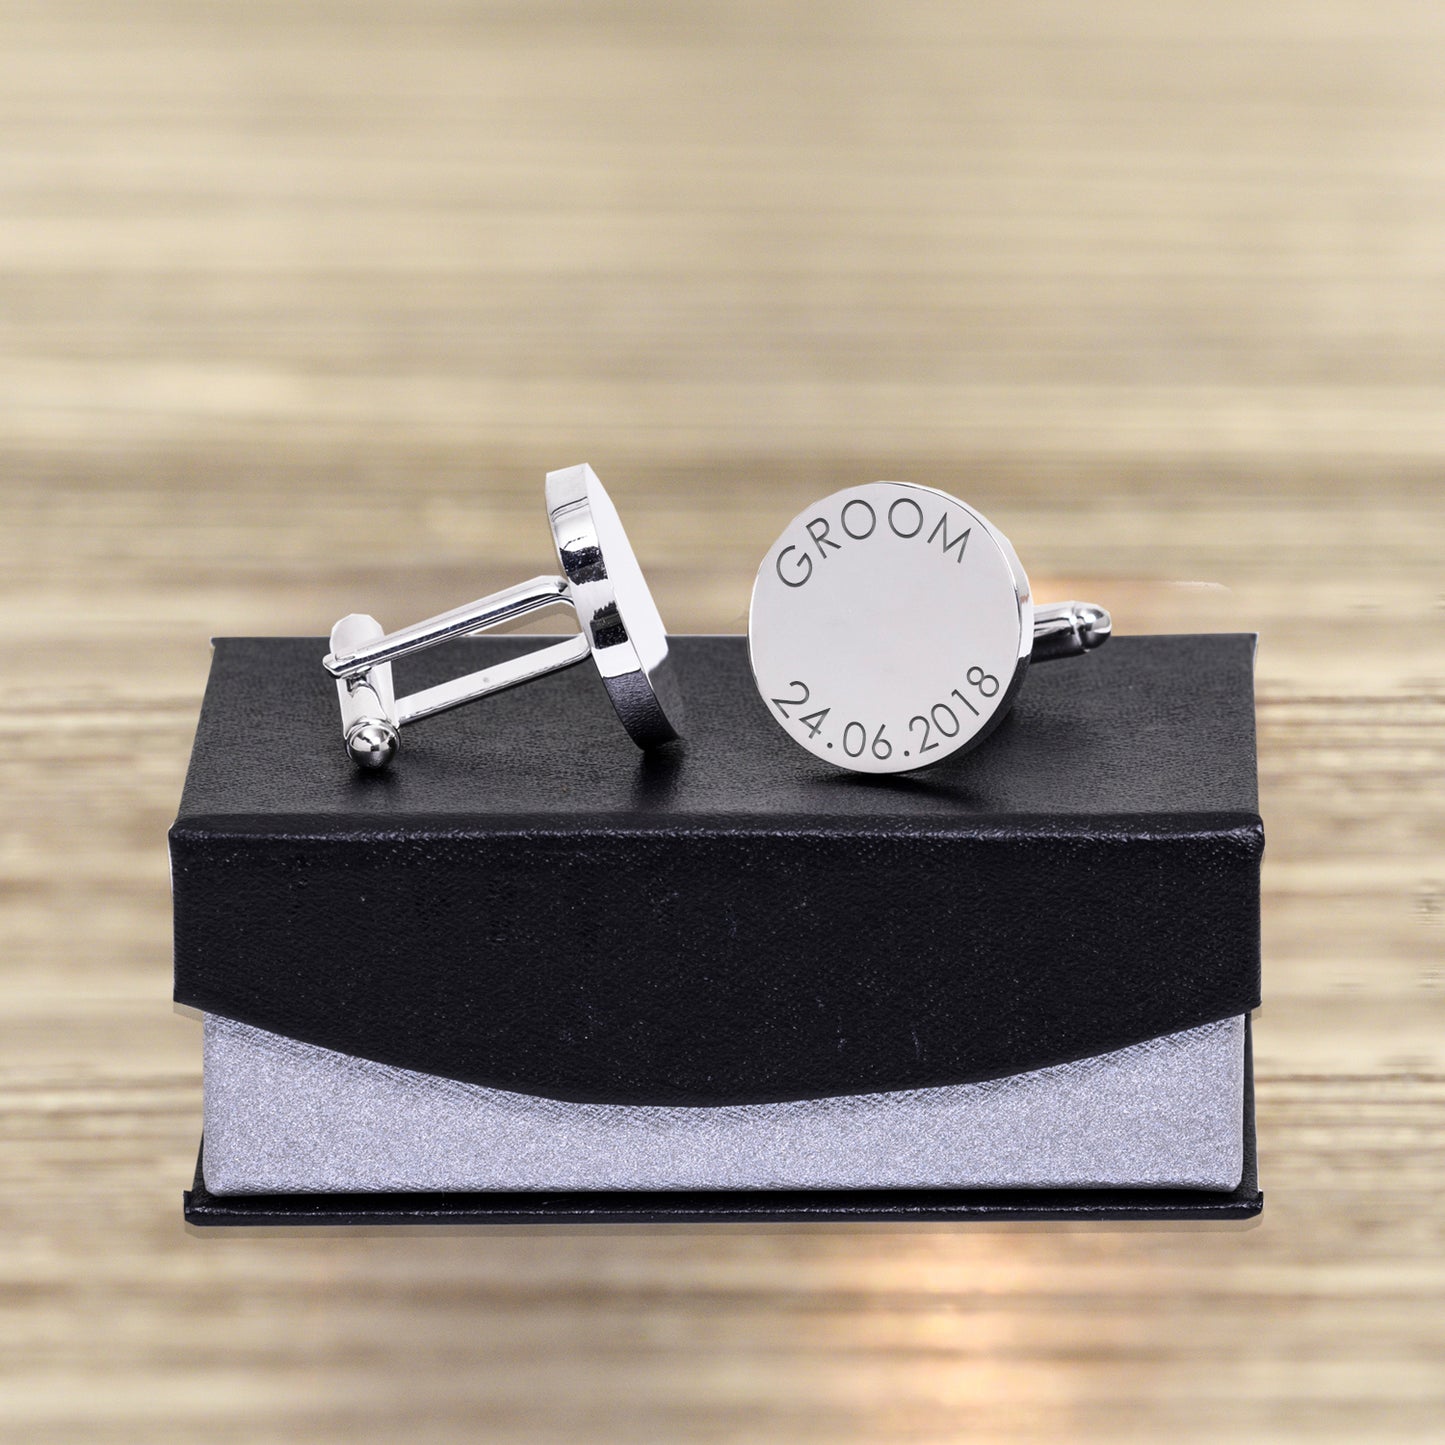 Personalised Wedding Party Role Cufflinks